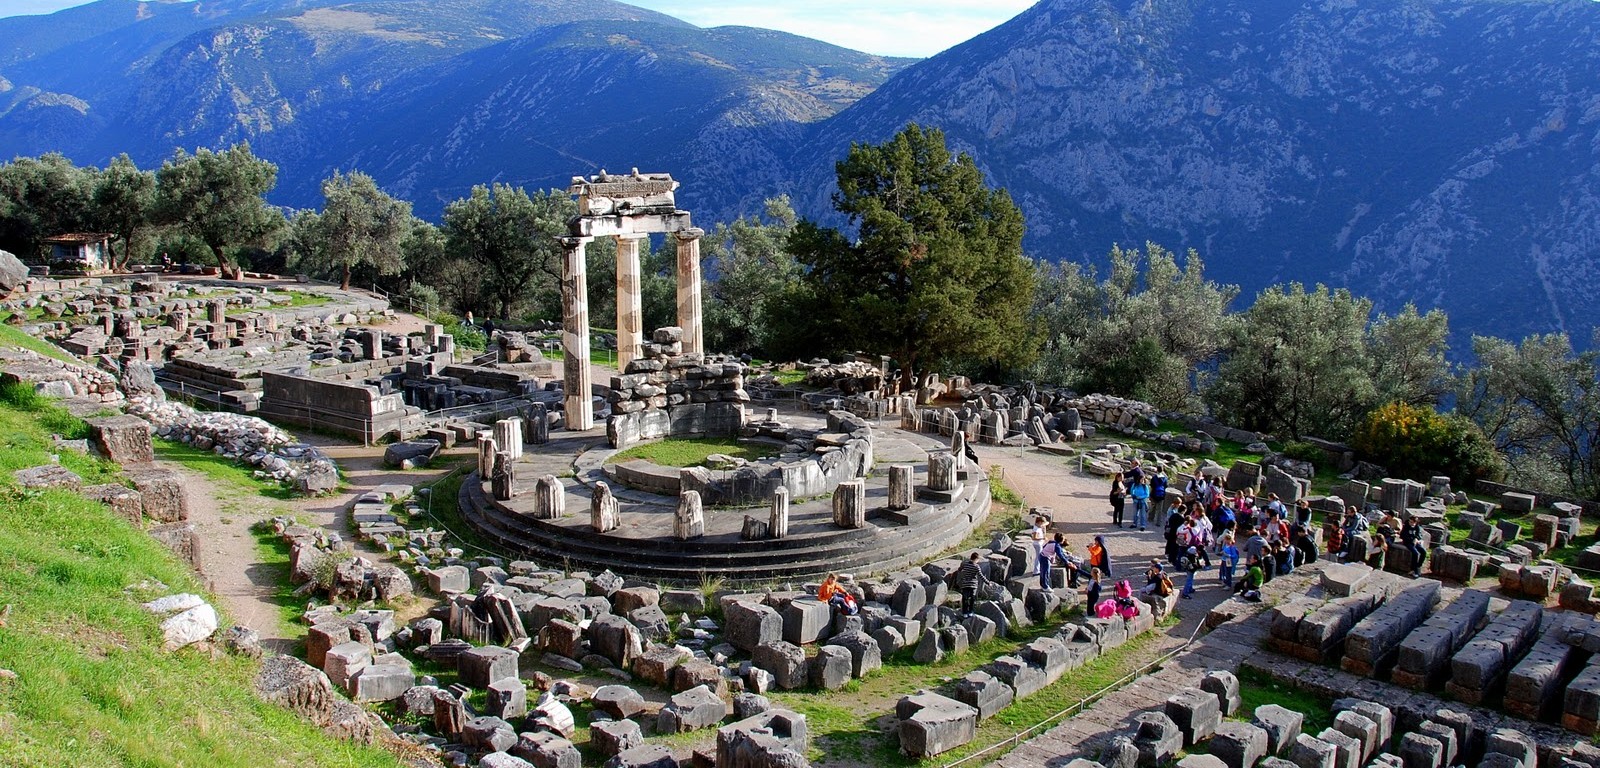 Delphi Archaeological Site - The Navel Of Earth In Greece